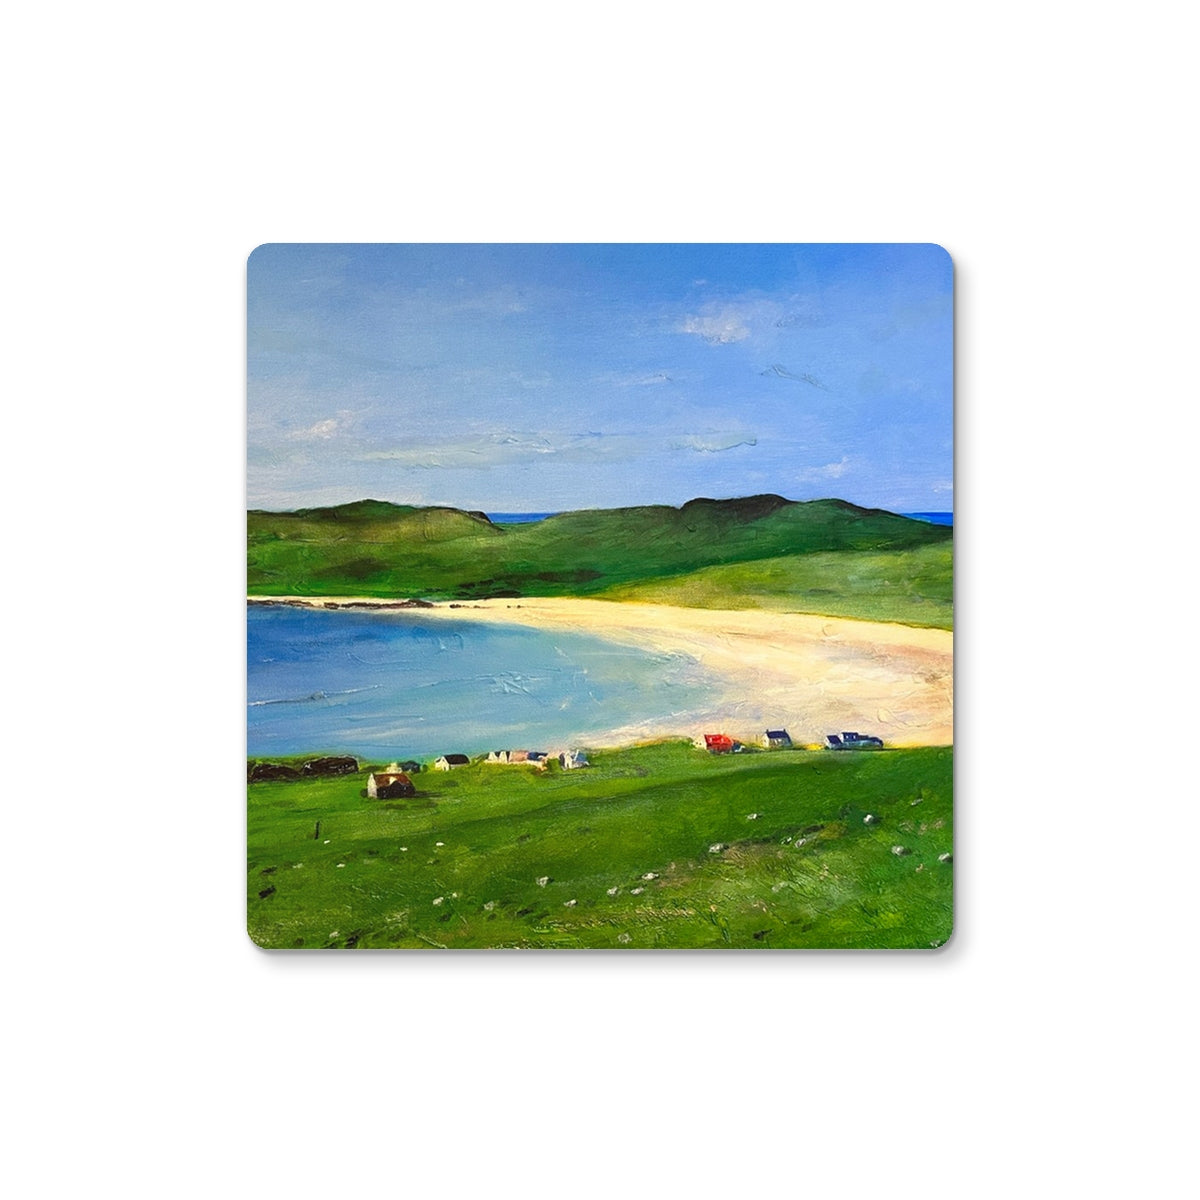 Balephuil Beach Tiree Art Gifts Coaster-Coasters-Hebridean Islands Art Gallery-4 Coasters-Paintings, Prints, Homeware, Art Gifts From Scotland By Scottish Artist Kevin Hunter